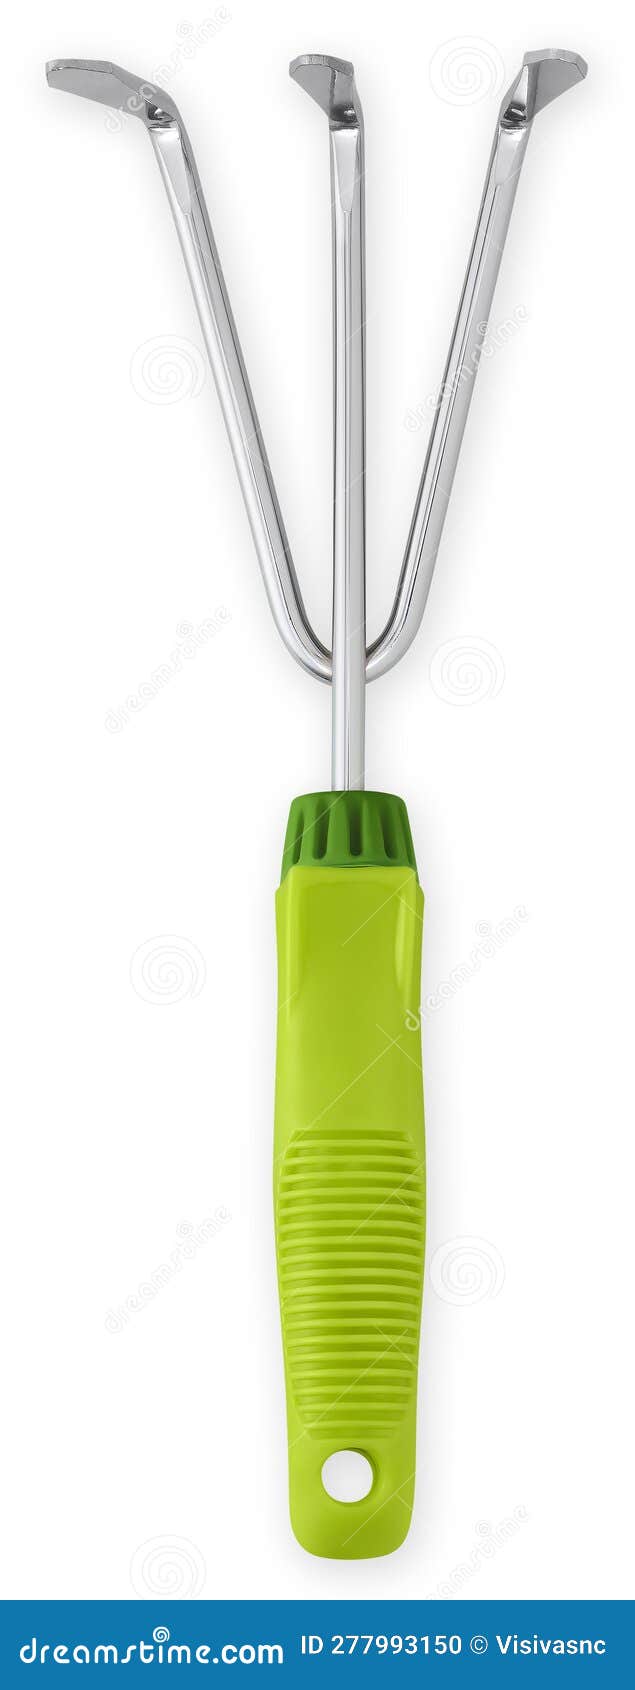 hand spud rake with plastic green grip, weeding and turning soil, garden tool equipment  with clipping path, for